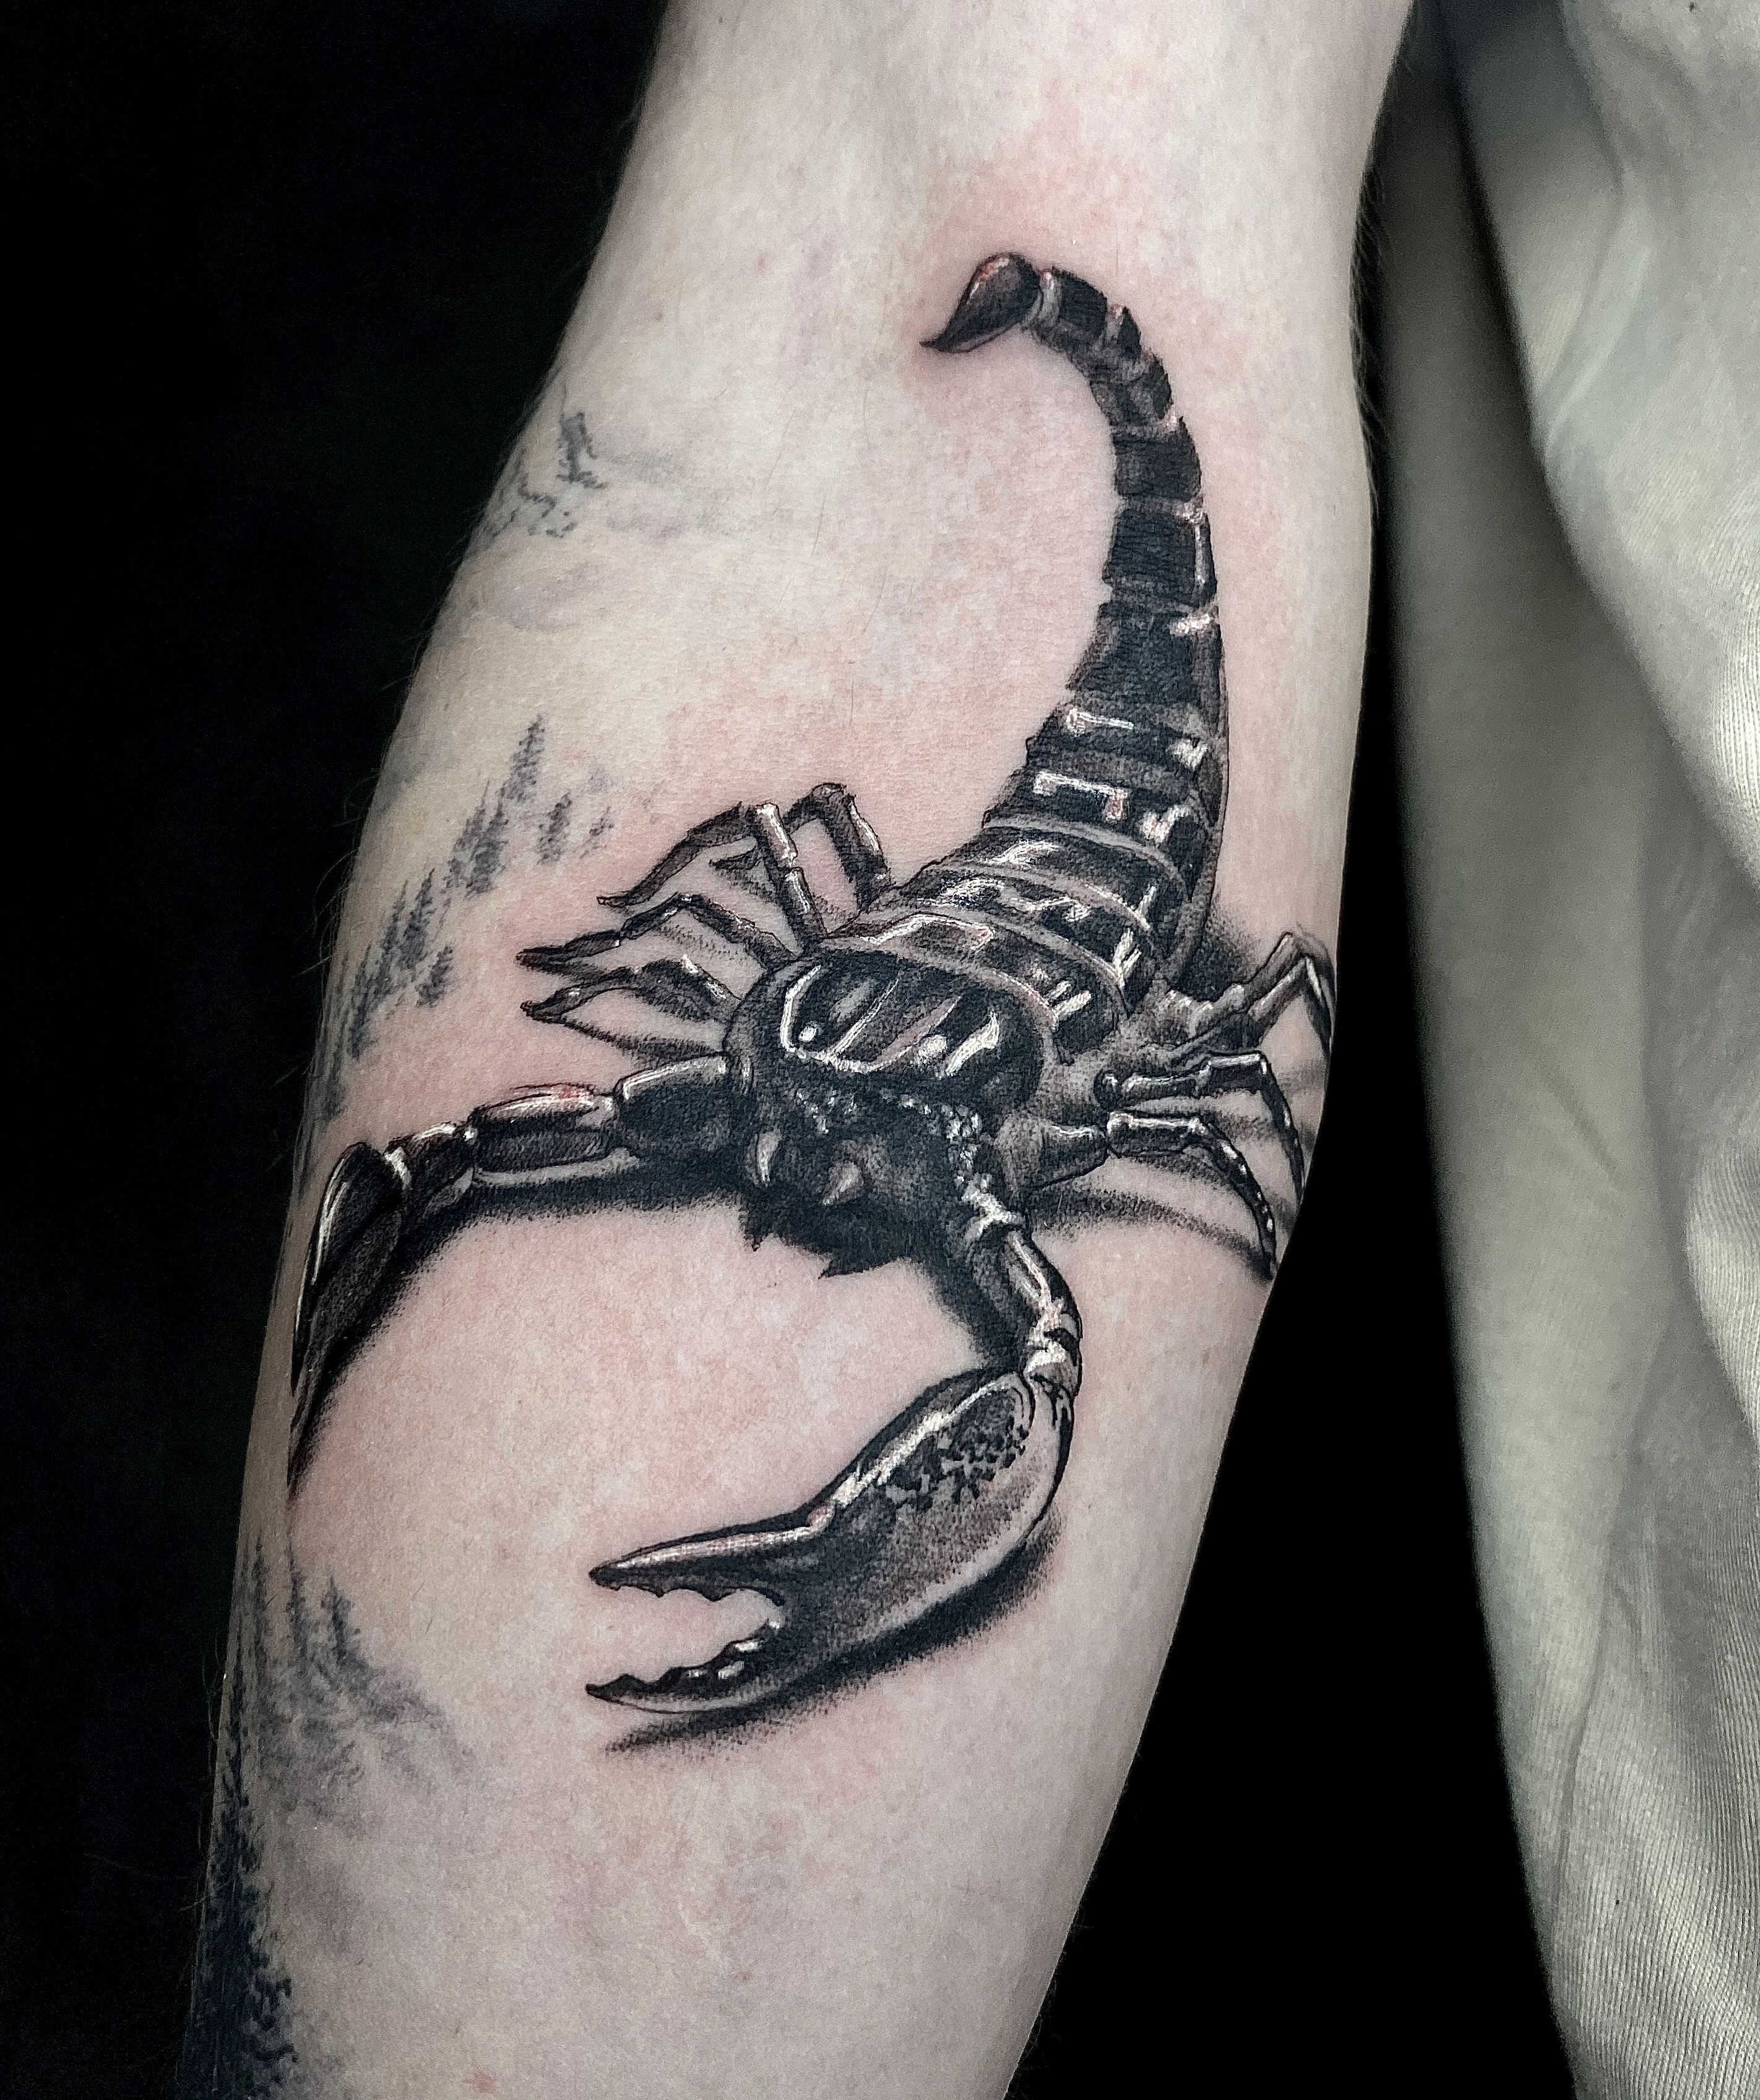 Tattoo uploaded by Southgate SG Tattoo & Piercing Studio • • Scorpion •  realistic piece by our resident @cat_vaska116 Books/info in our Bio:  @southgatetattoo • • • #scorpiontattoo #scorpiotattoo #scorpion  #realistictattoo #southgate #